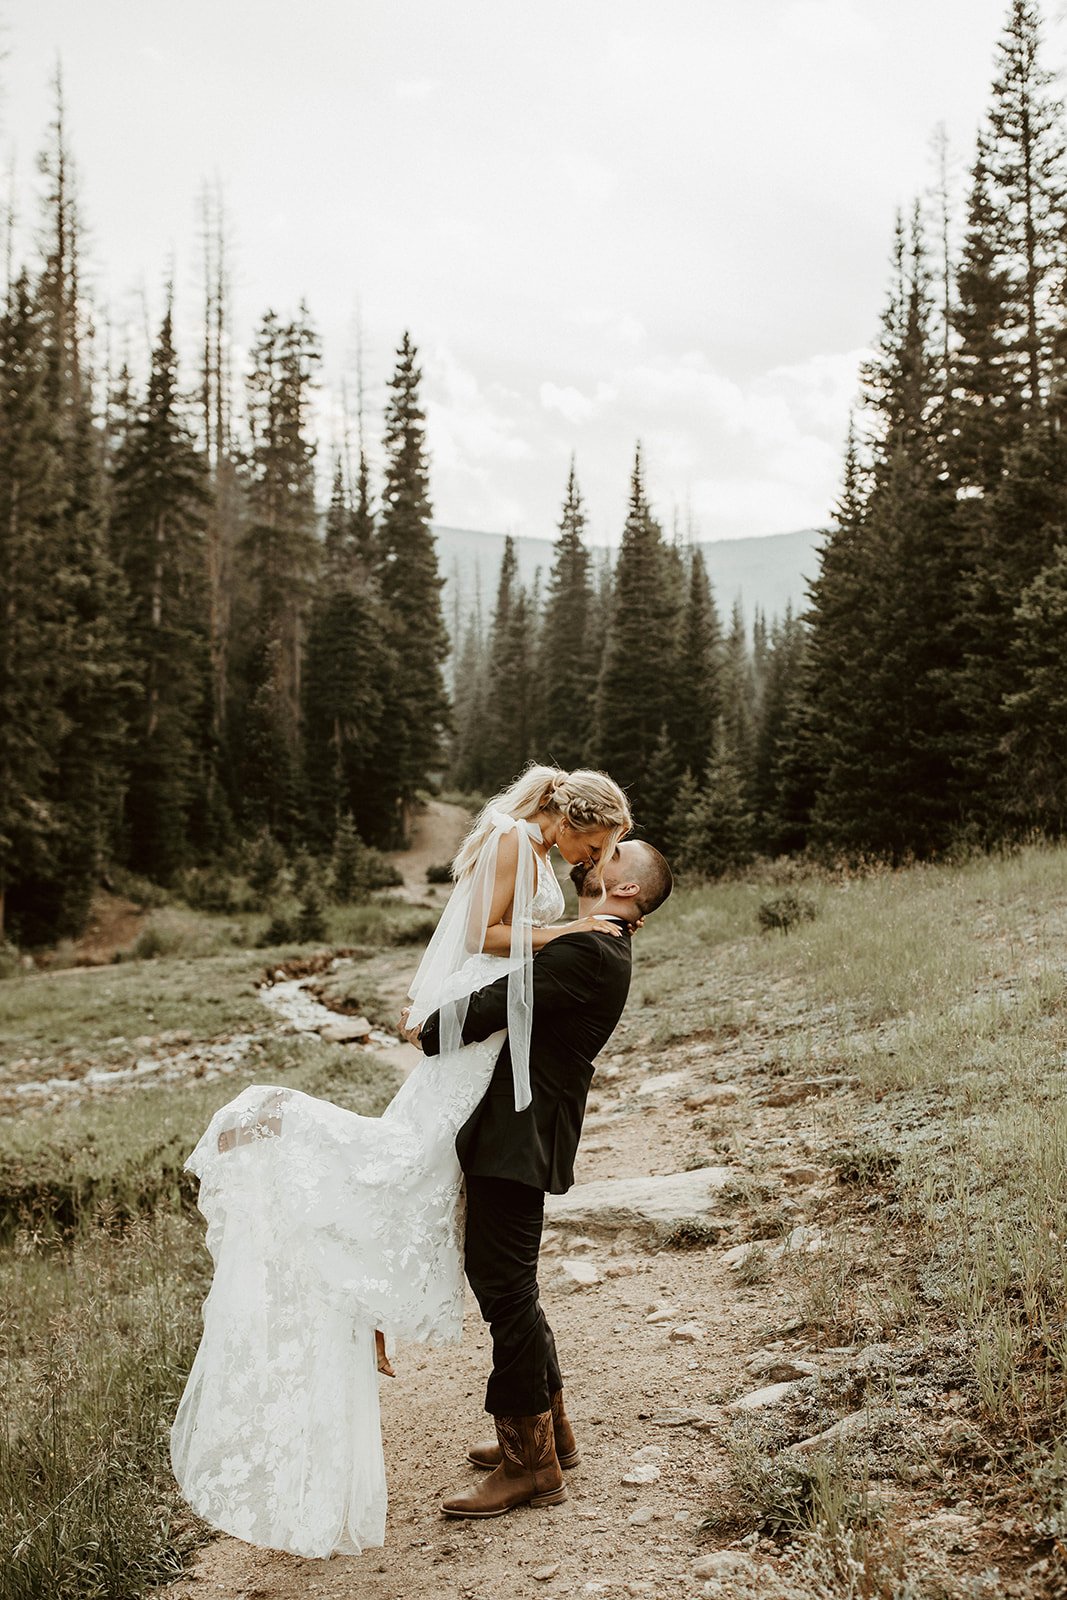 Made-With-Love-Elsie-Wedding-Dress-Rocky-Mountains-15.jpg